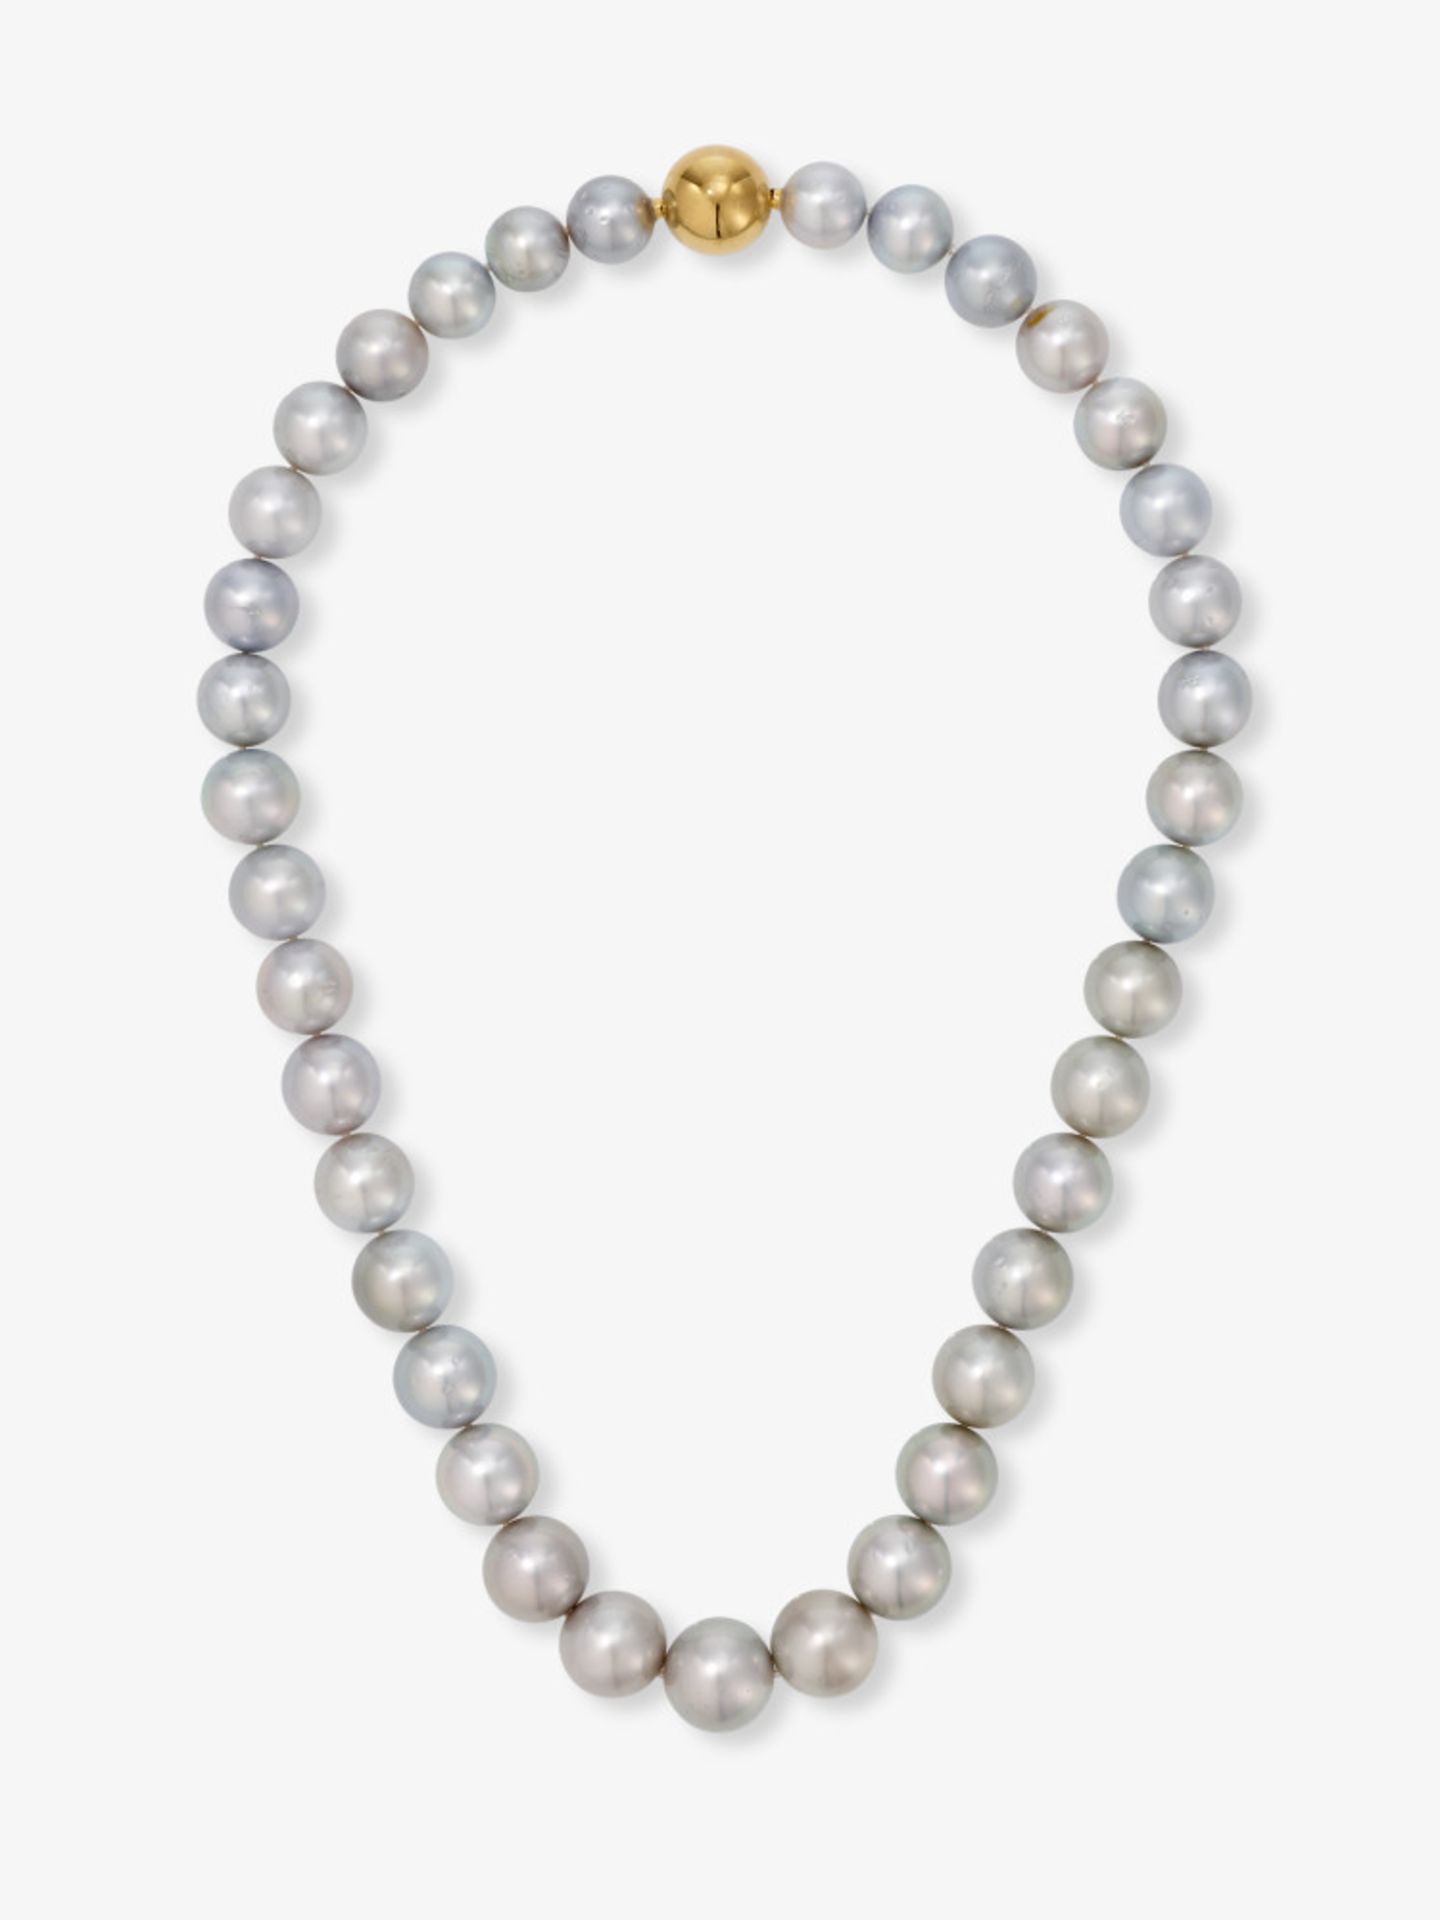 A silver-grey cultured pearl necklace - Image 2 of 2